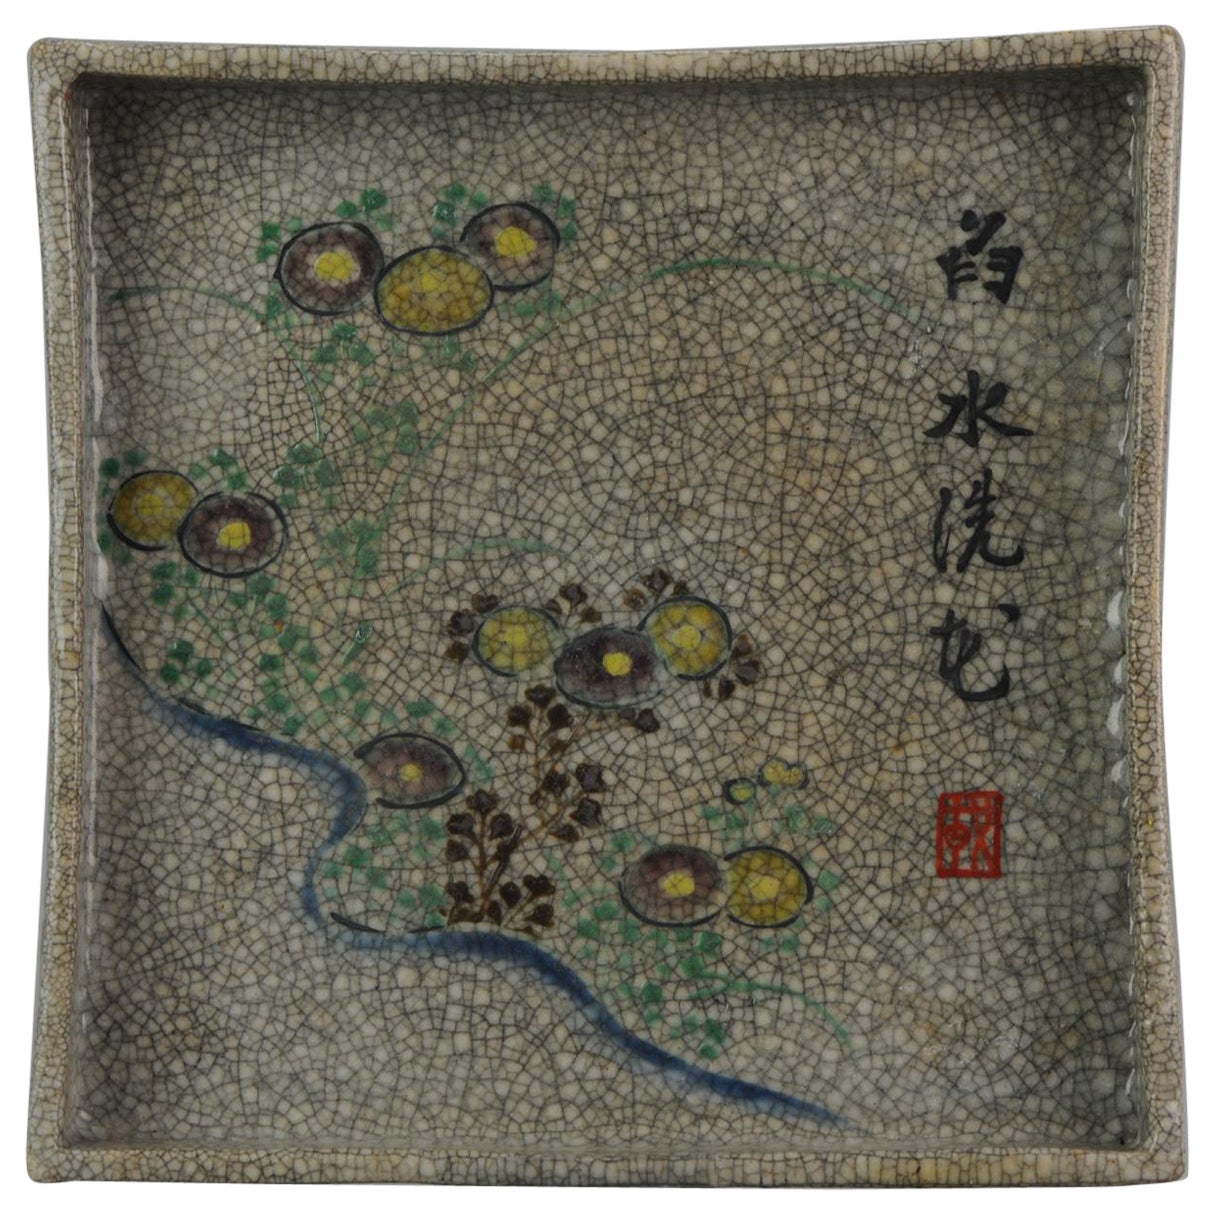 Antique Japanese Tray for Water FLowers and Calligraphy, 19th/20th Century